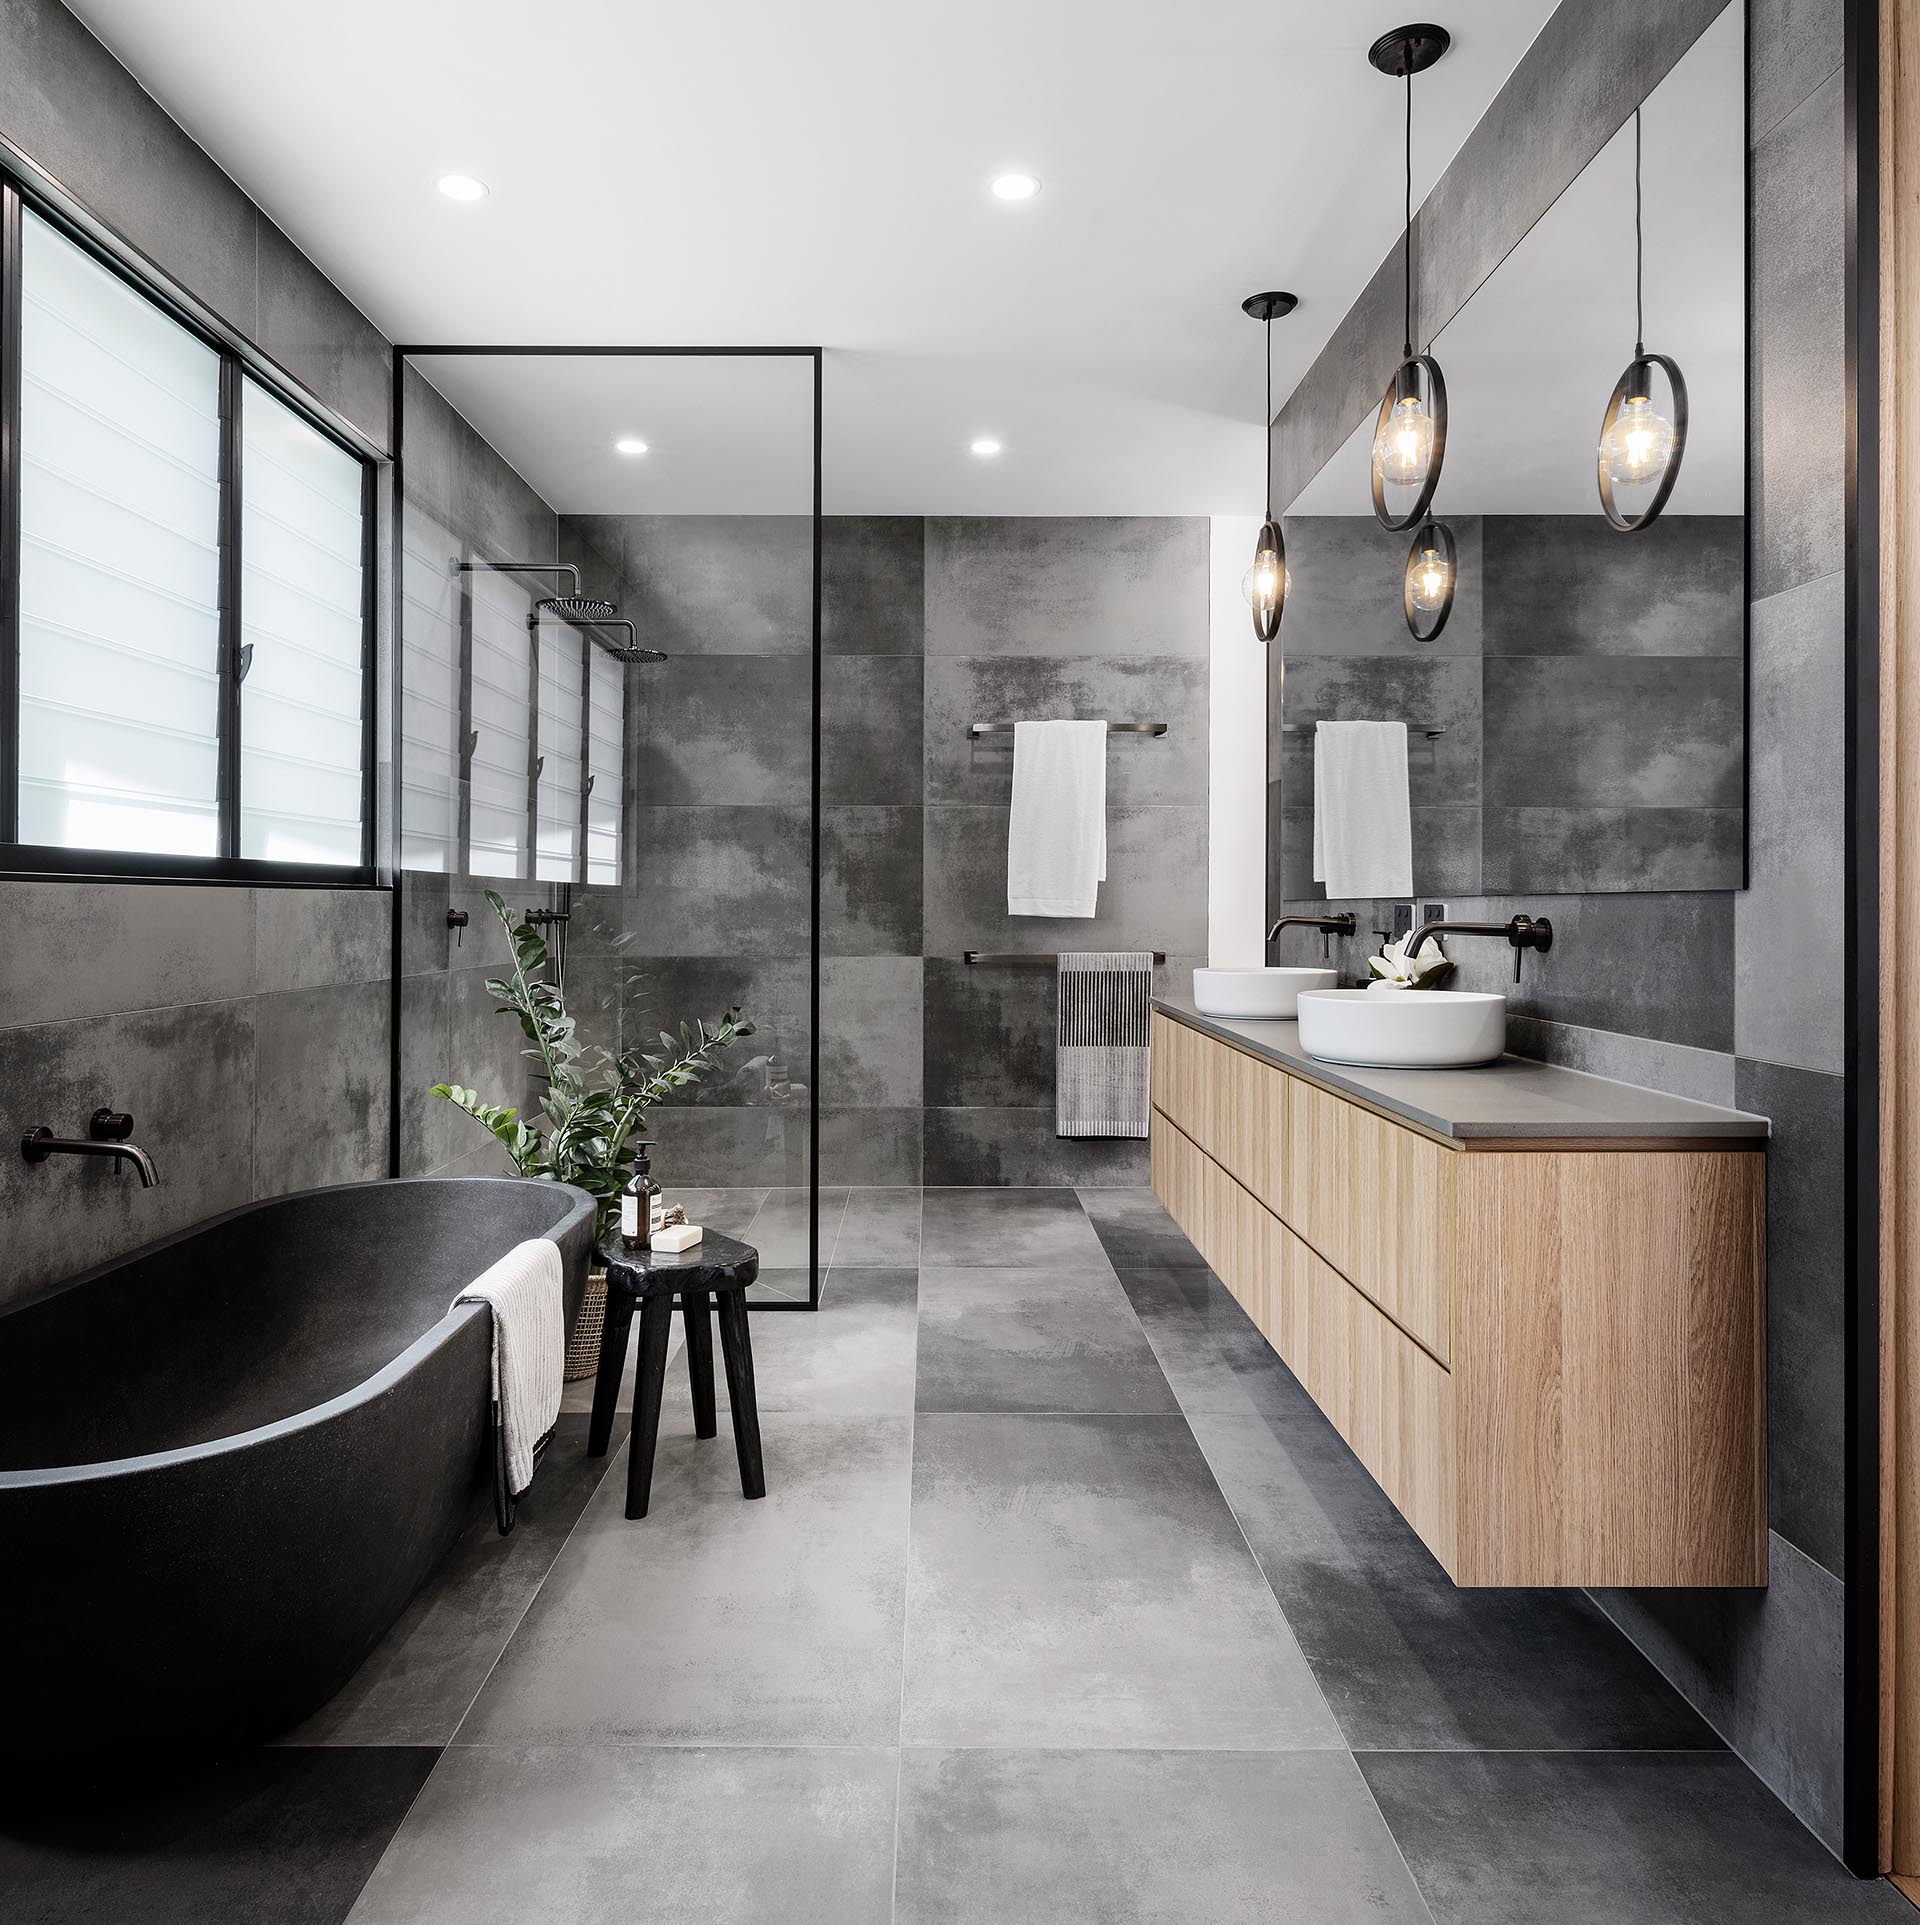 A Cloudy Grey Tile Sets The Palette For This Bathroom - 【Free Download